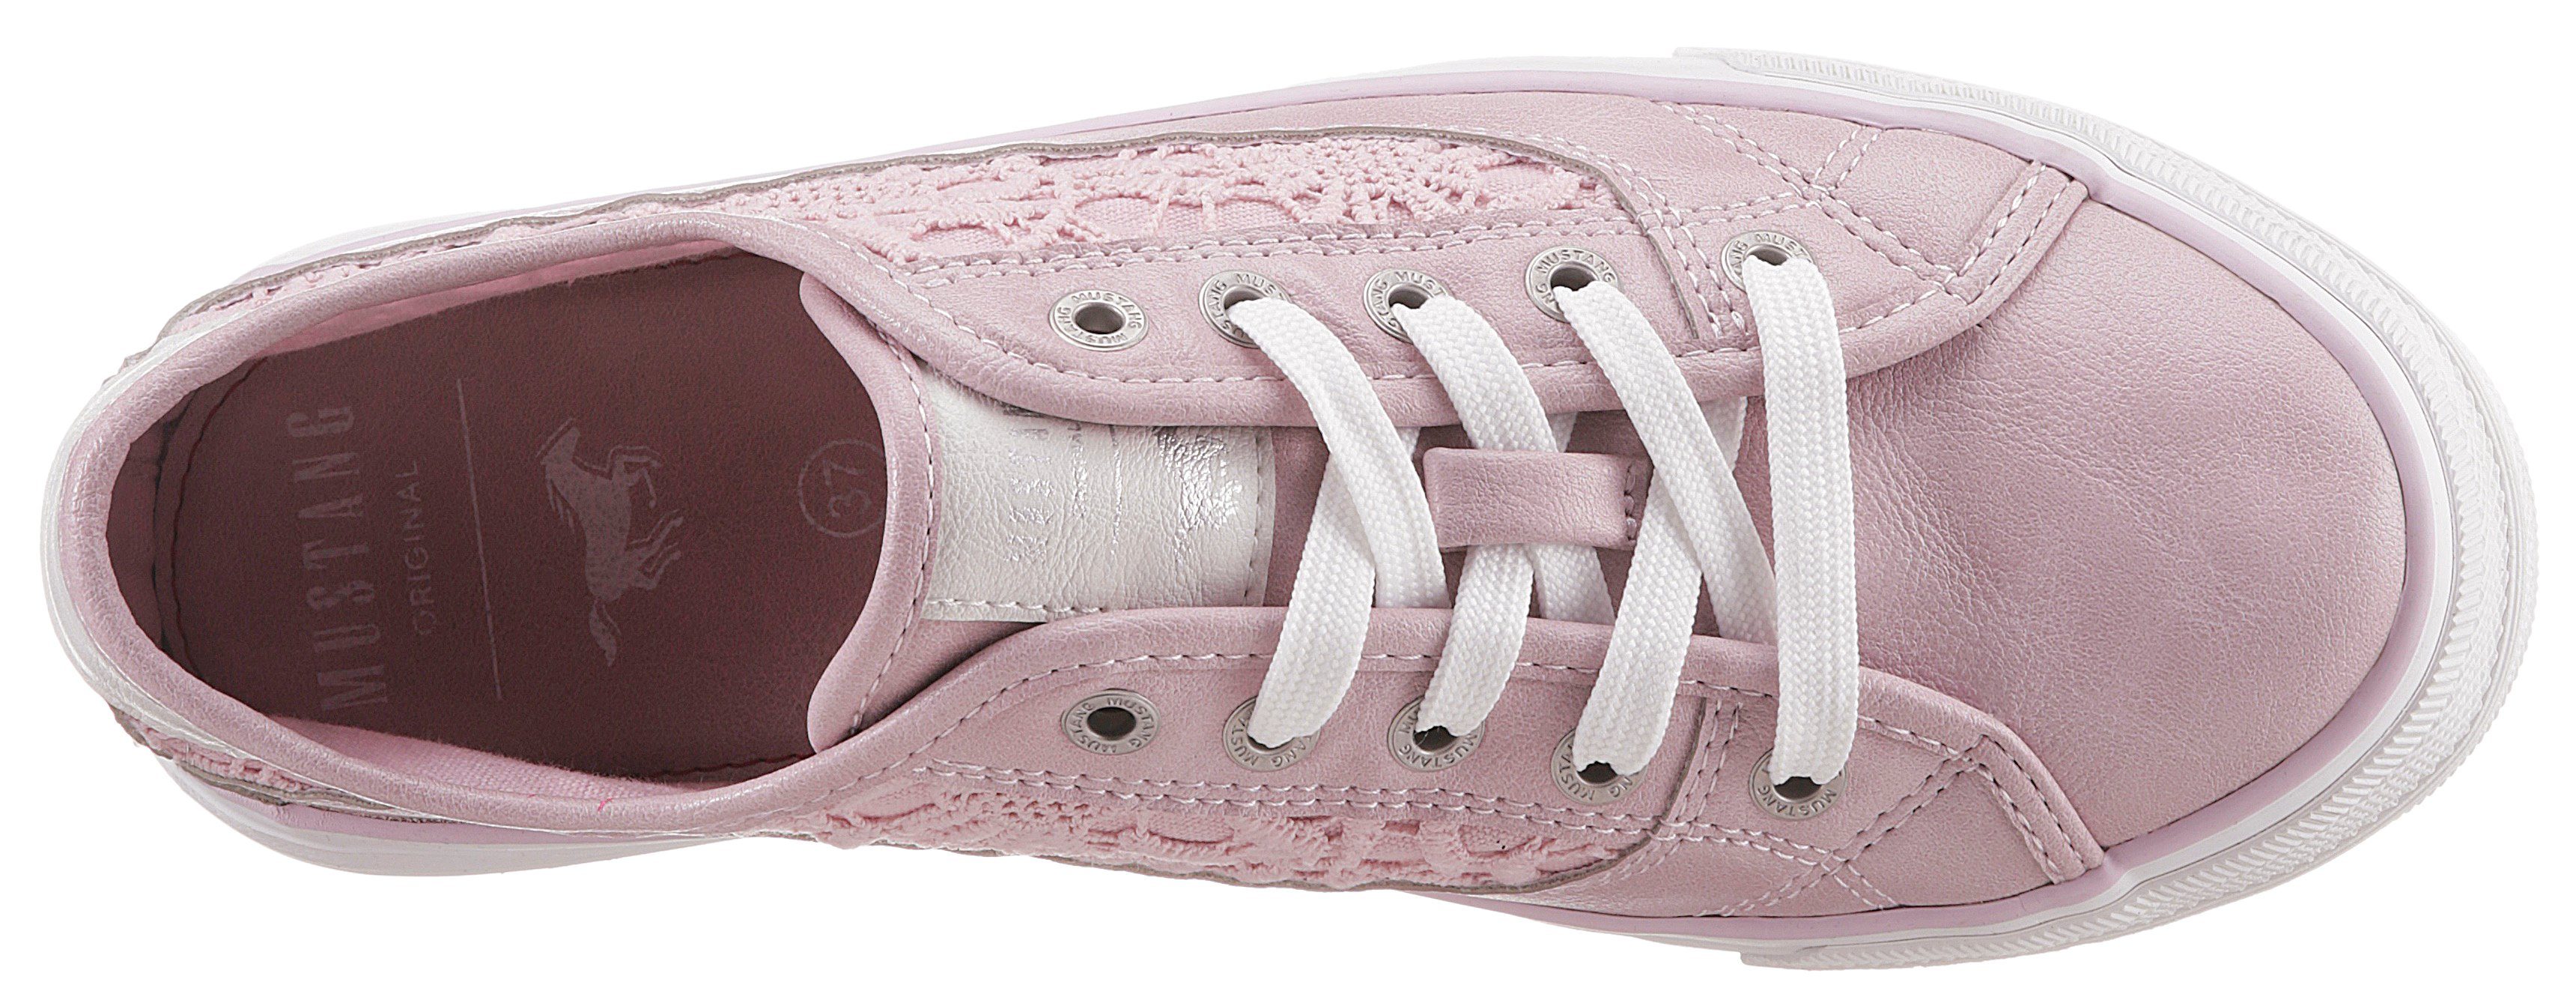 Spitze rosa Shoes Mustang Sneaker mit